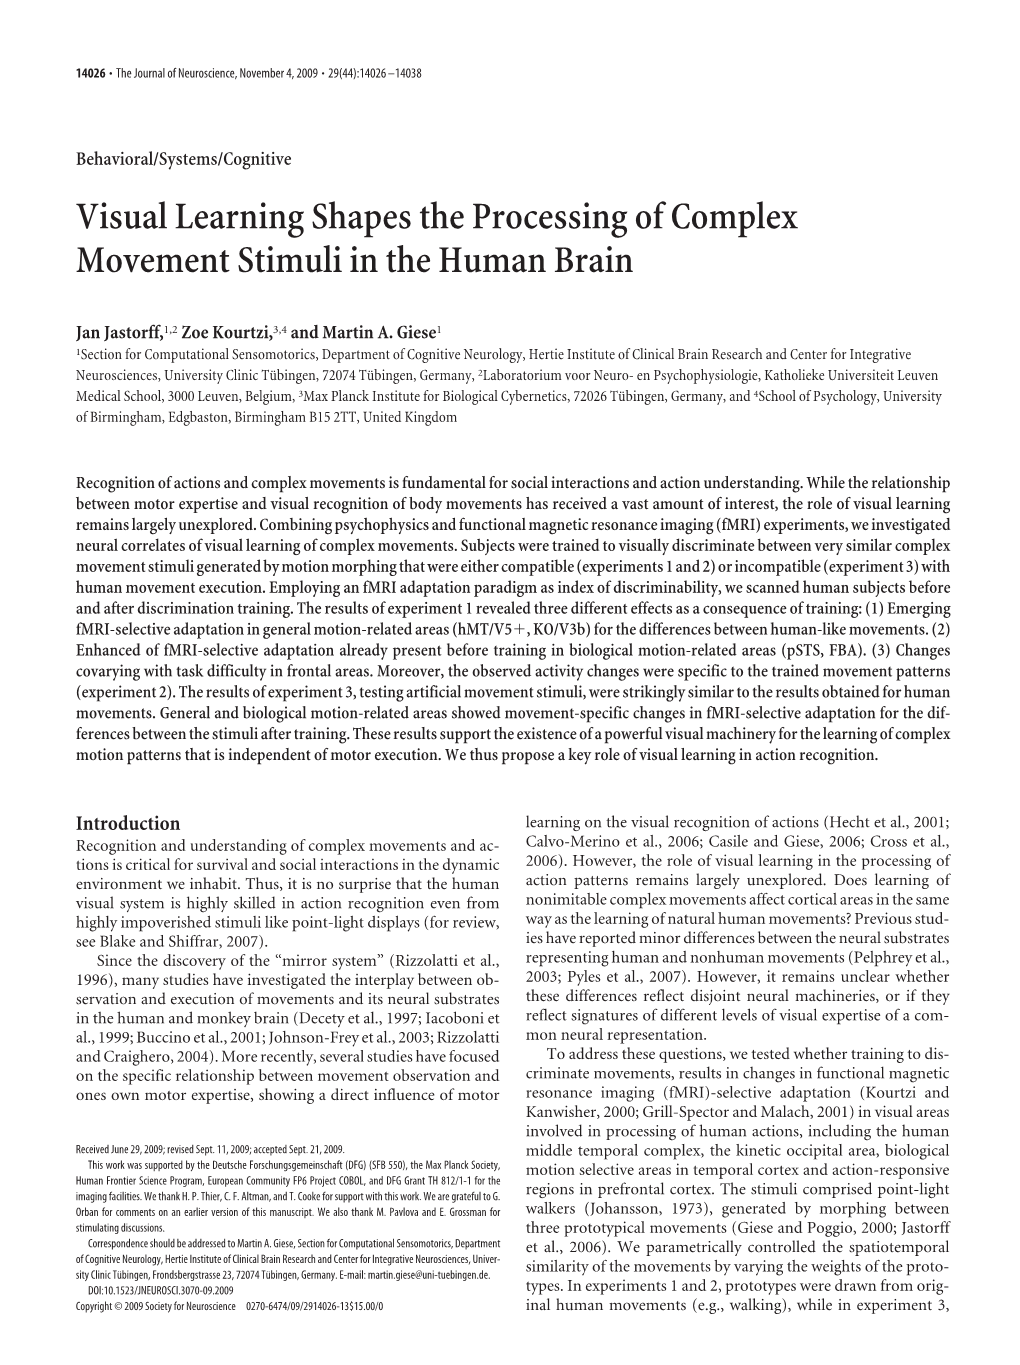 Visual Learning Shapes the Processing of Complex Movement Stimuli in the Human Brain